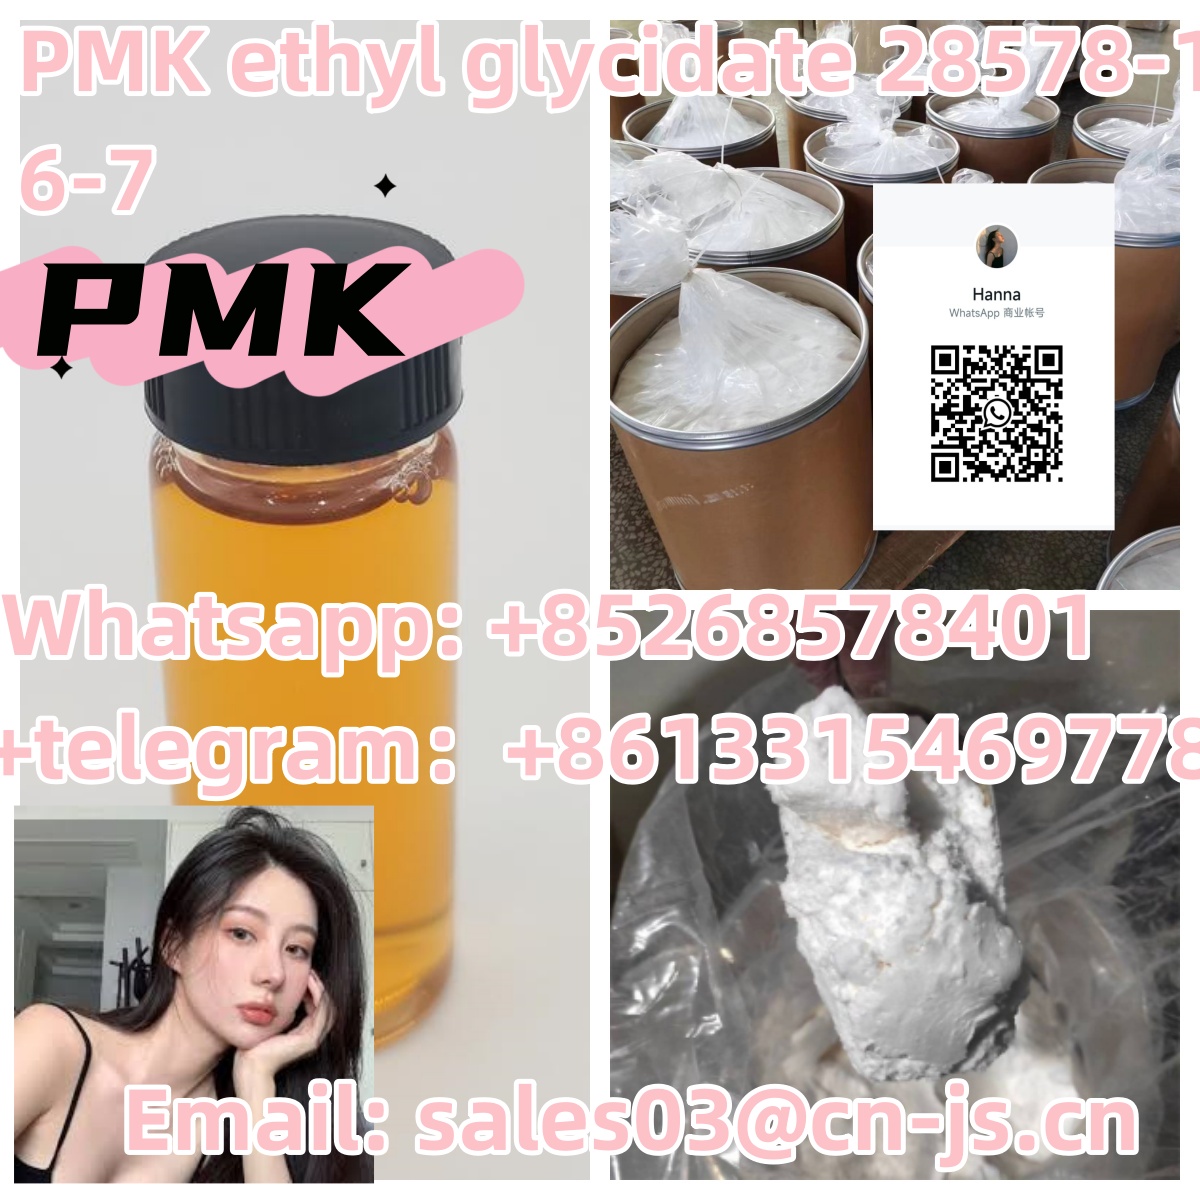 Strong effect PMK ethyl glycidate 28578-16-7 ,111,Pets,Free Classifieds,Post Free Ads,77traders.com